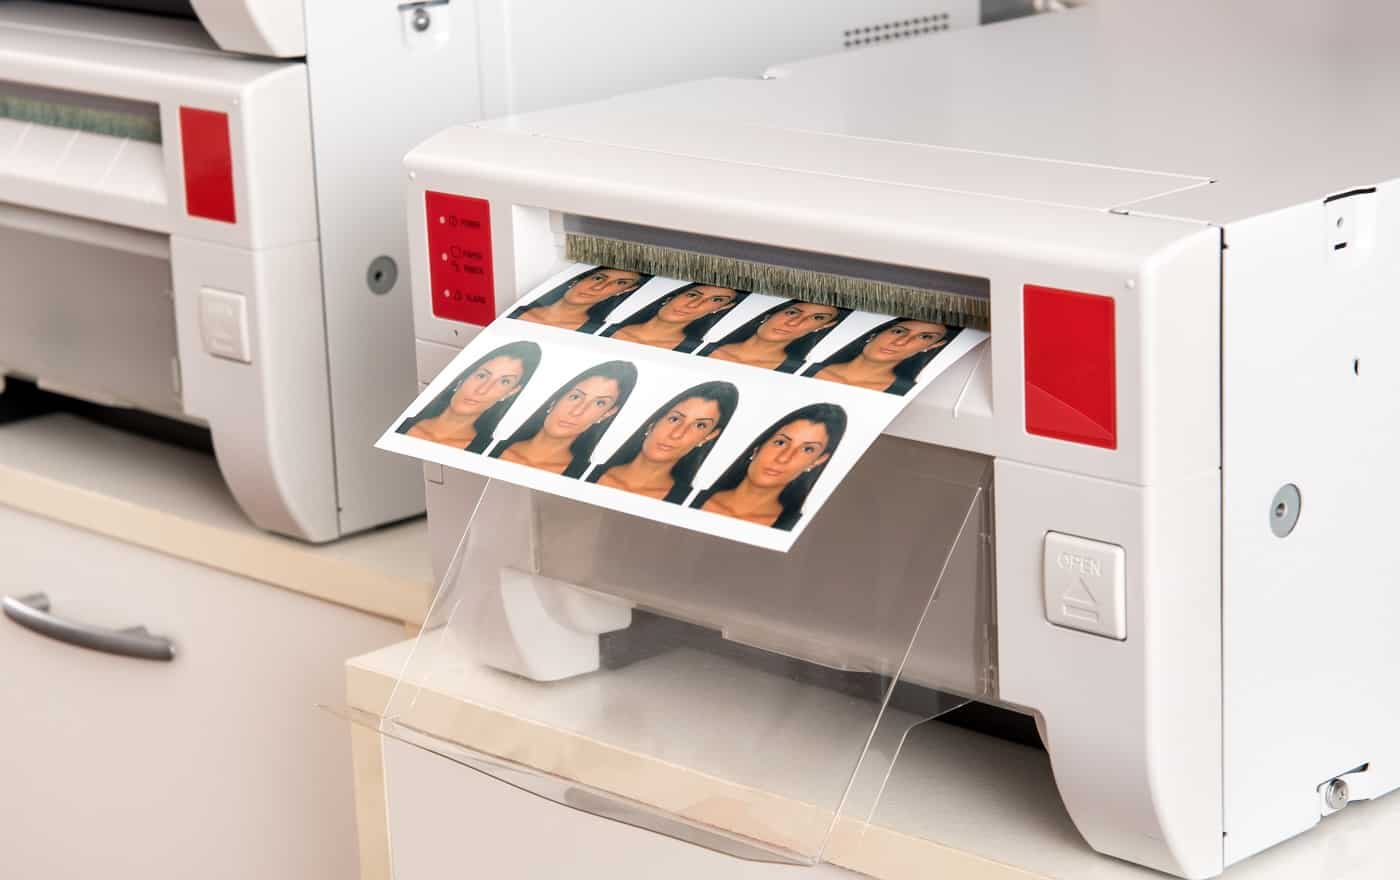 Printing passport photos of a woman on a printer with a sheet of eight photographs exiting the machine in a close up view. Printer For Screen Printing Transparencies.